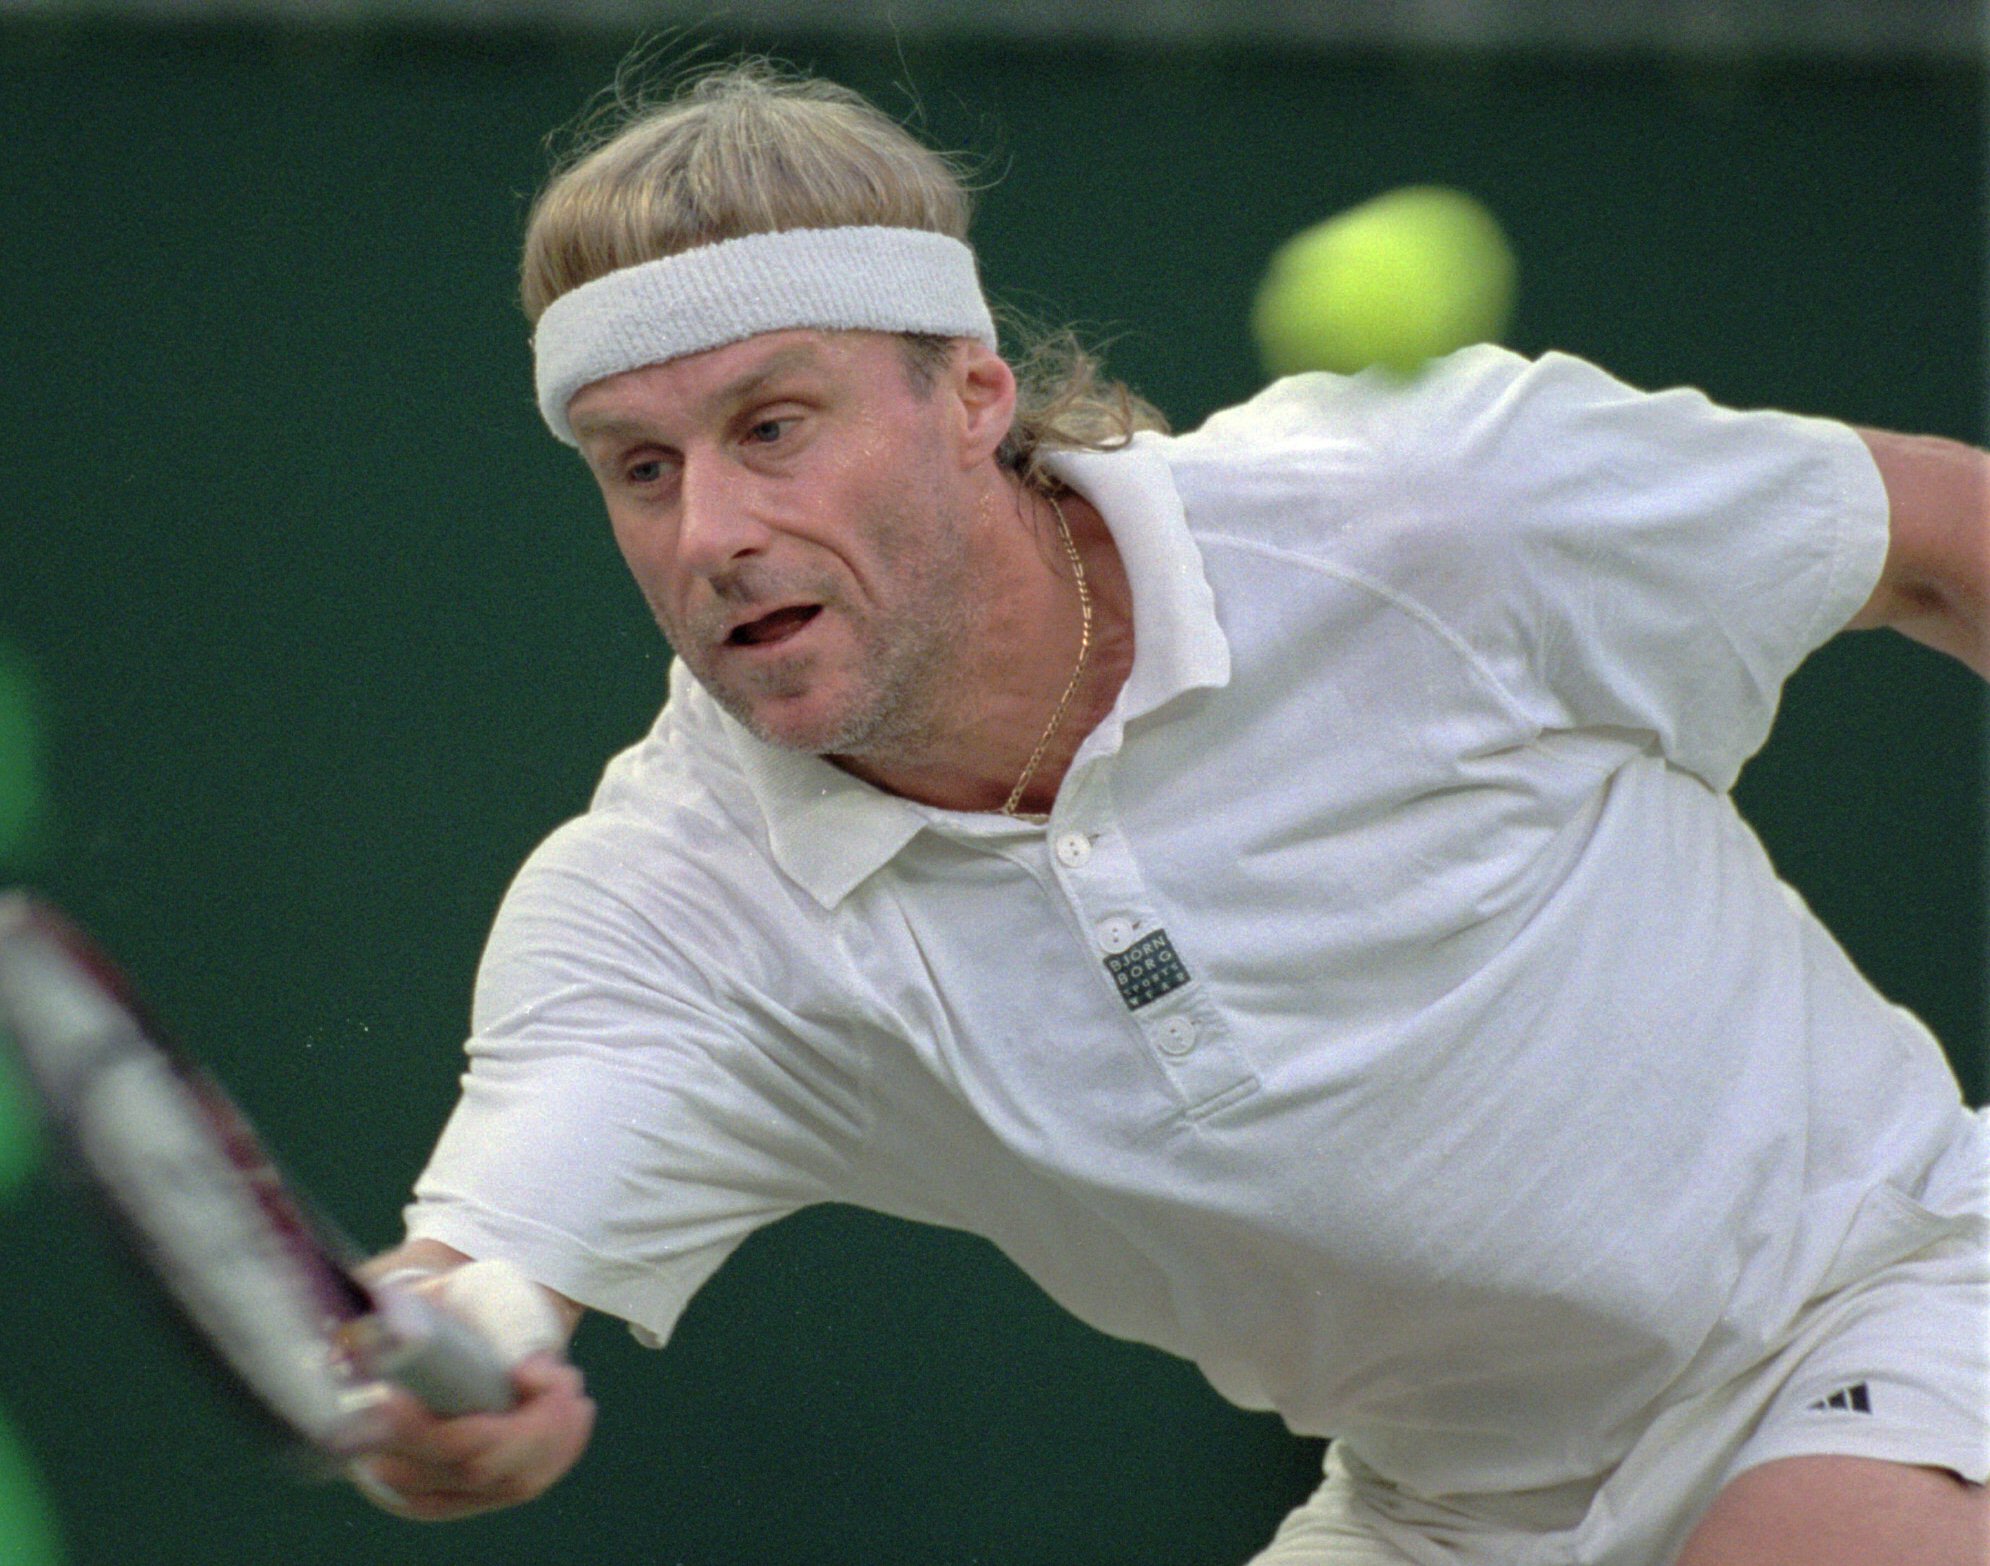 1991 Monte Carlo: Bjorn again? Borg's first match in seven years